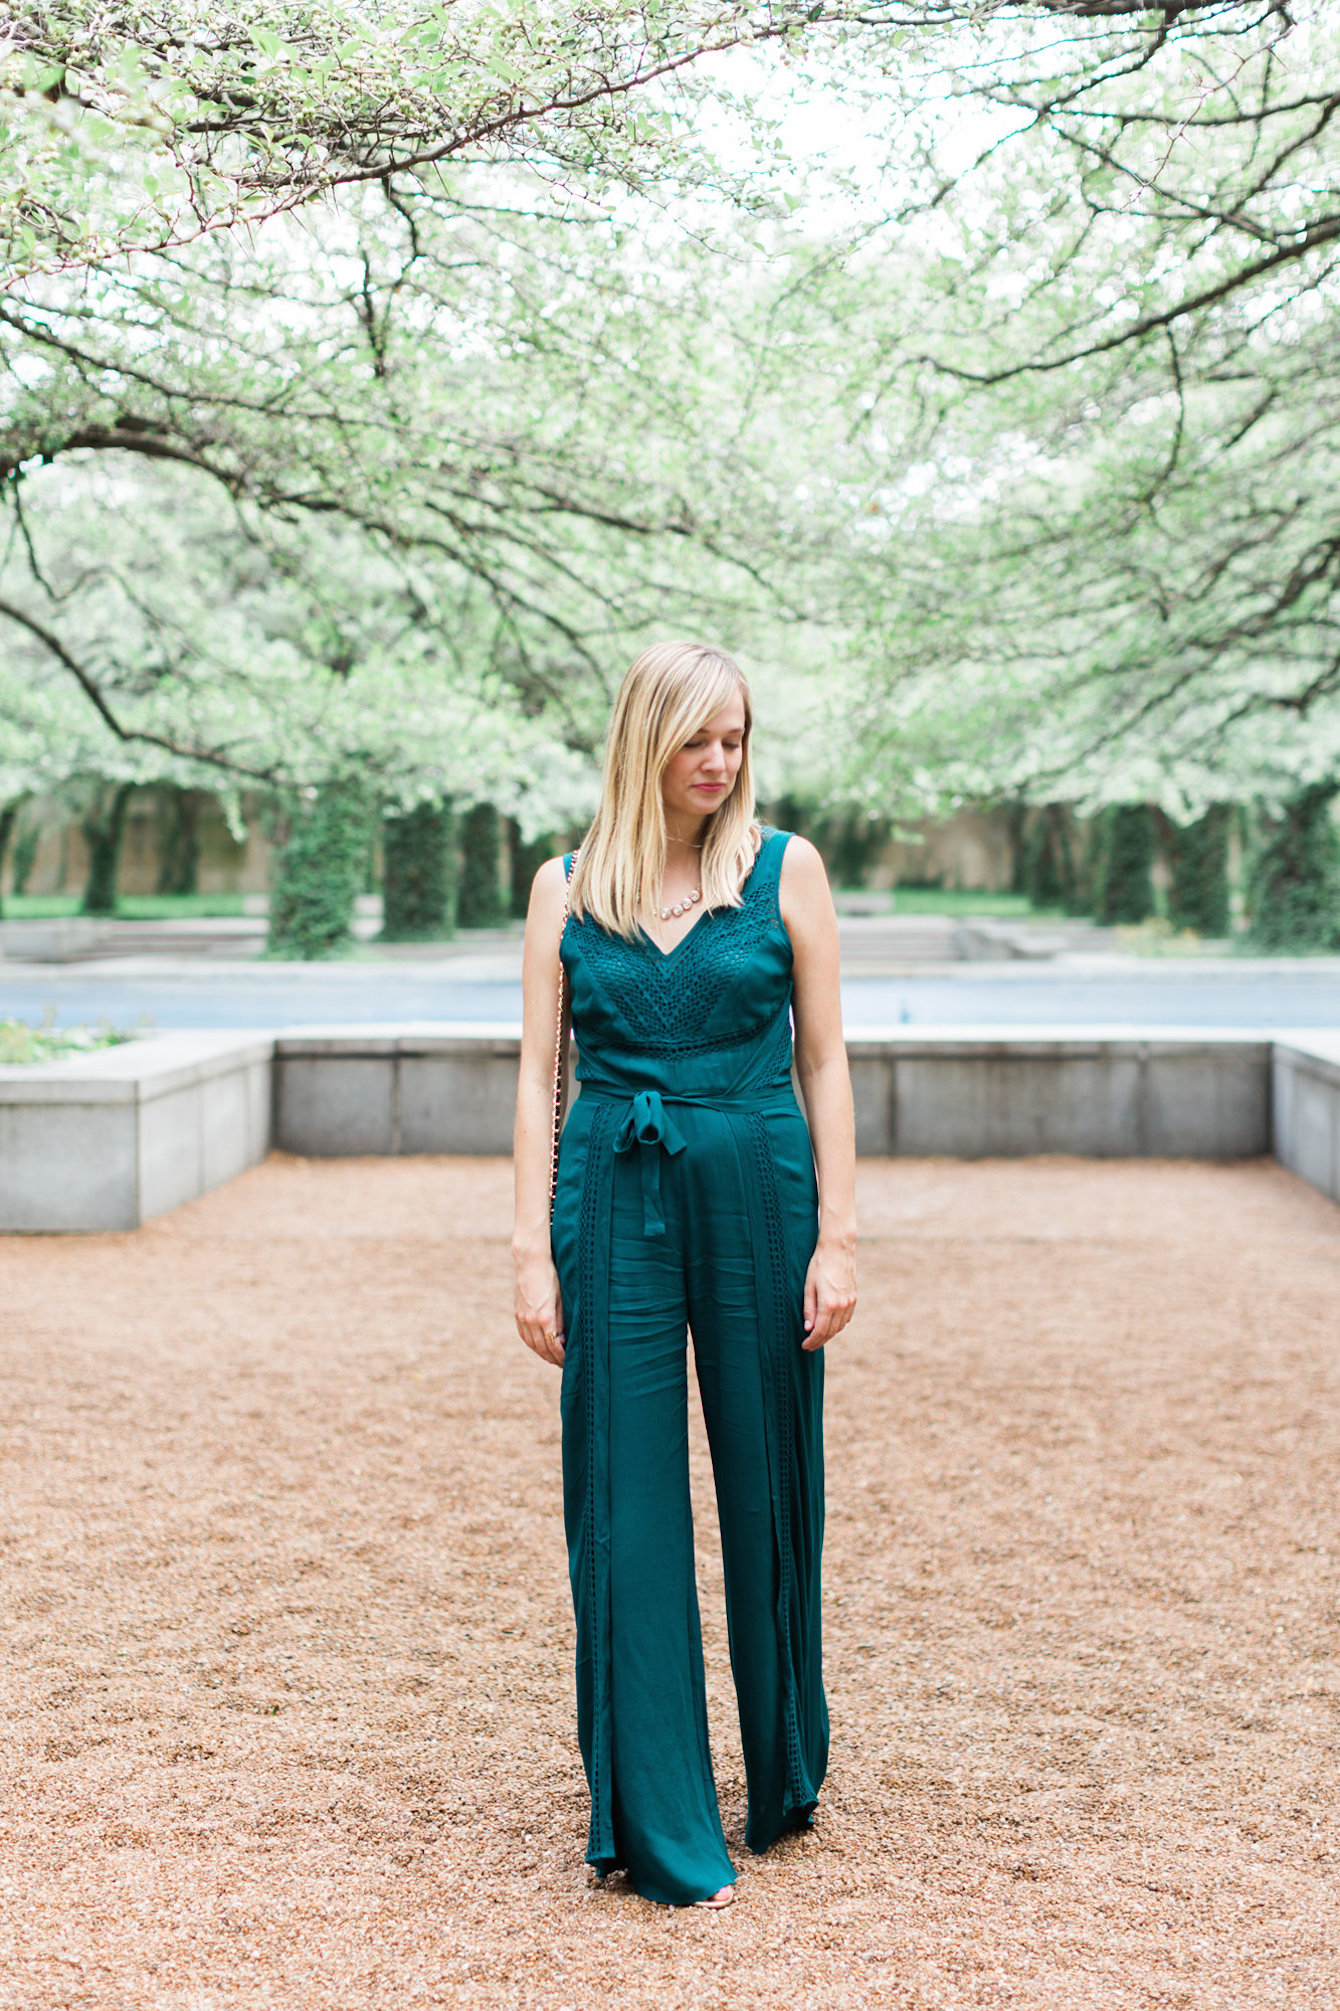 My Favorite Anthropologie Jumpsuit | Charmingly Styled